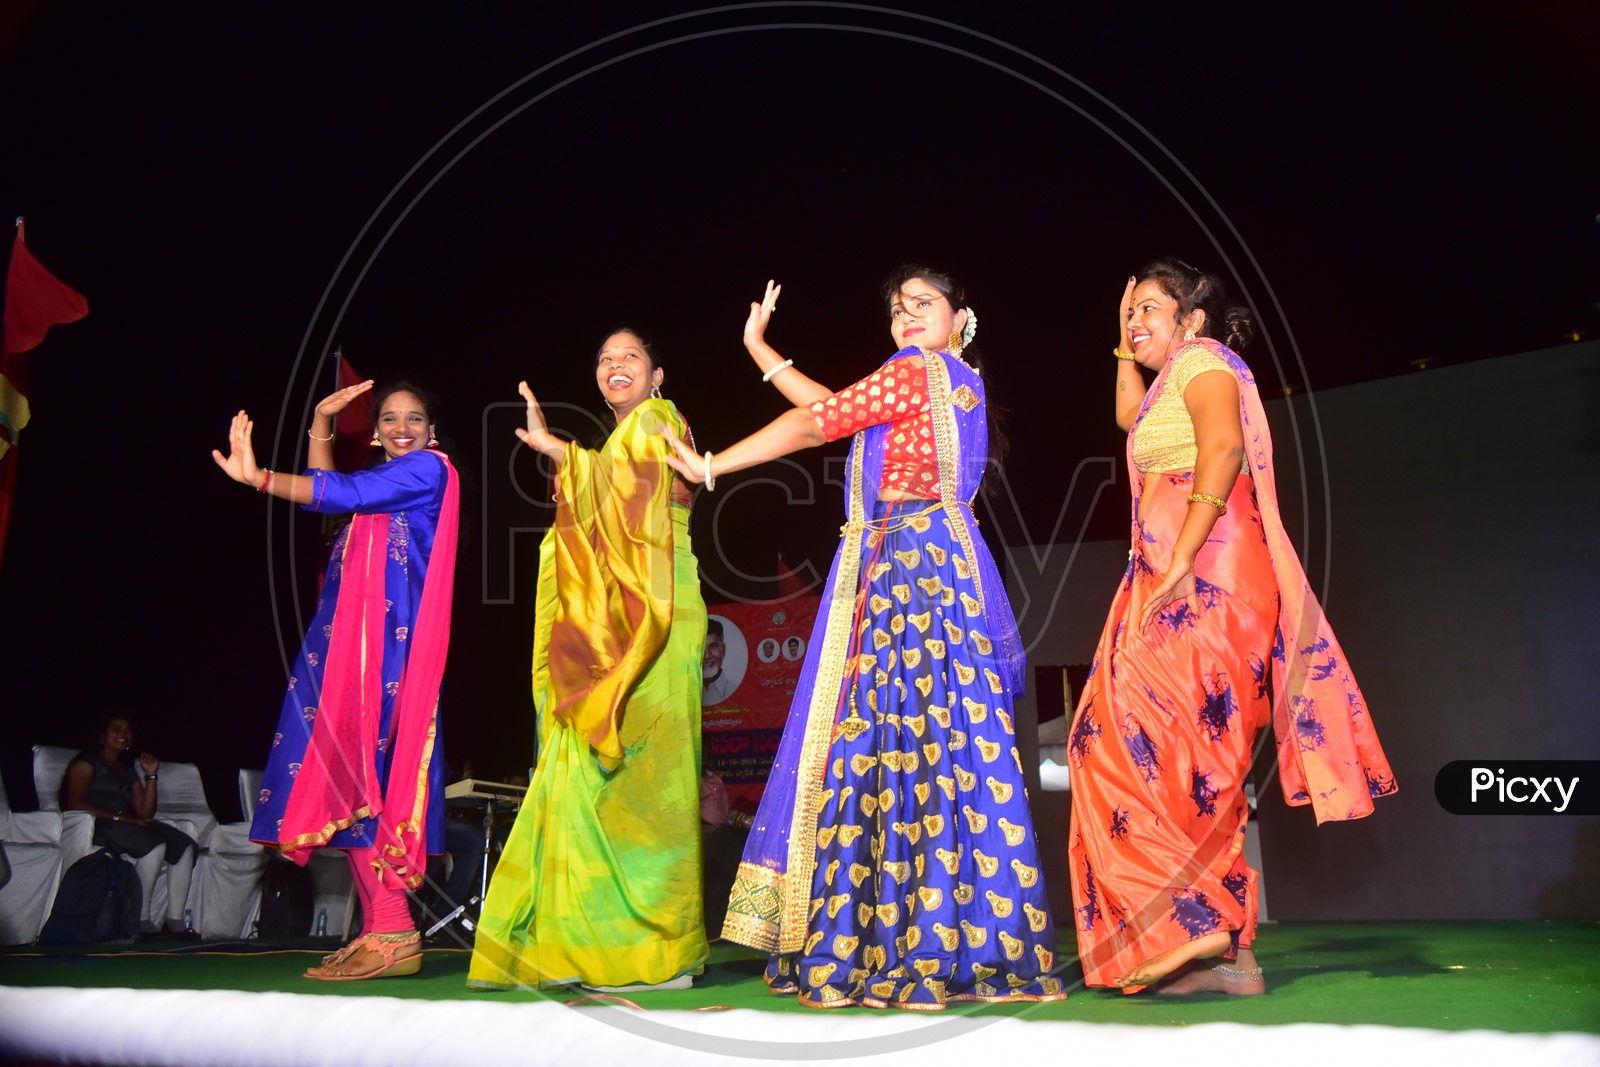 Ladies Dancing On Stage In an Event